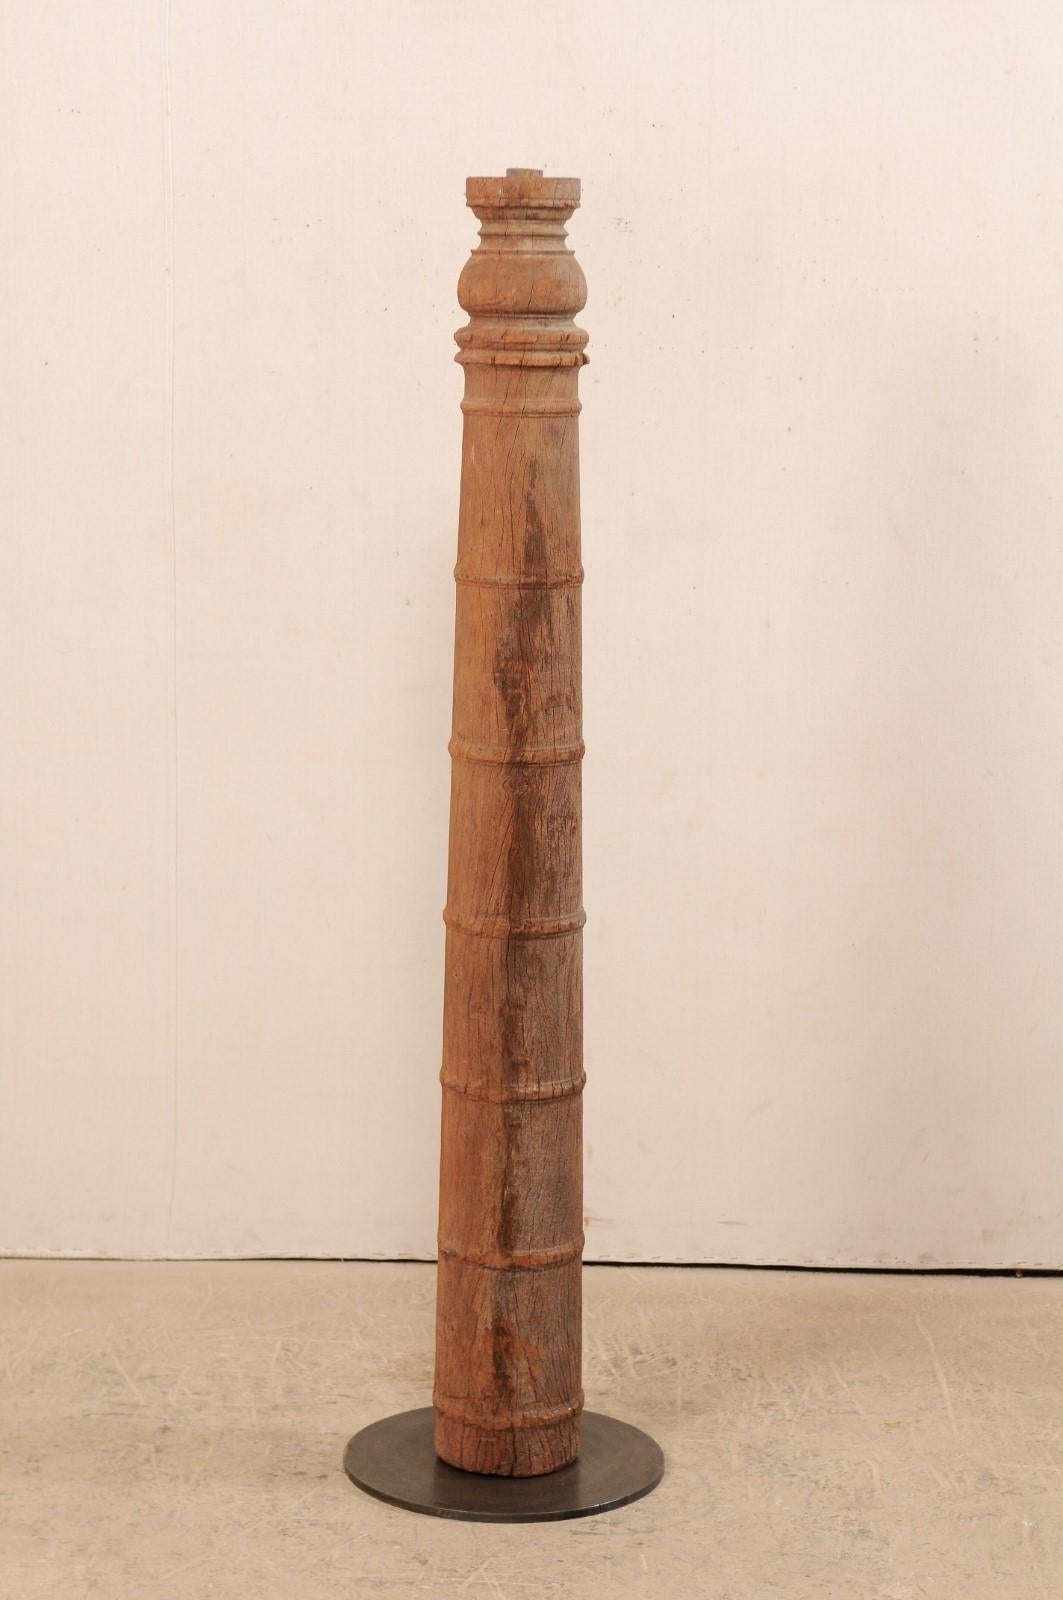 A single 19th century British Colonial carved wood column with custom stand. This antique hand carved wooden architectural element from India, which stands approximately 5.5 feet in height, features a rounded column adorn with a series of carved